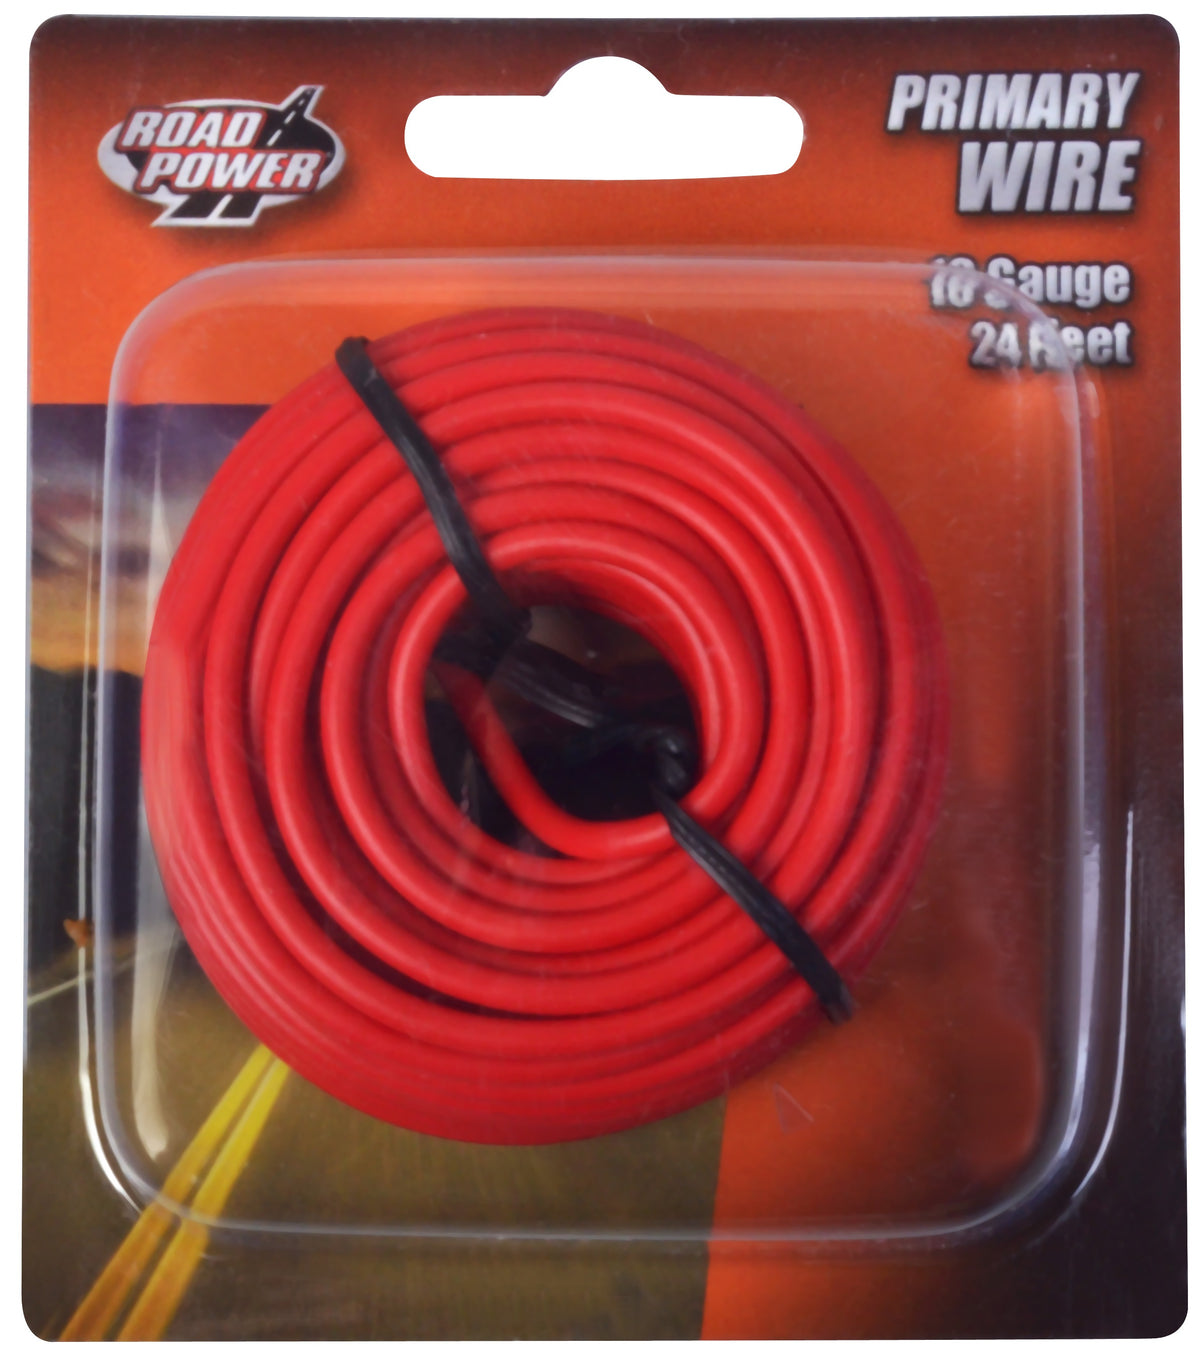 Road Power 55668033 Primary Electrical Wire, 16 Gauge, 24', Red